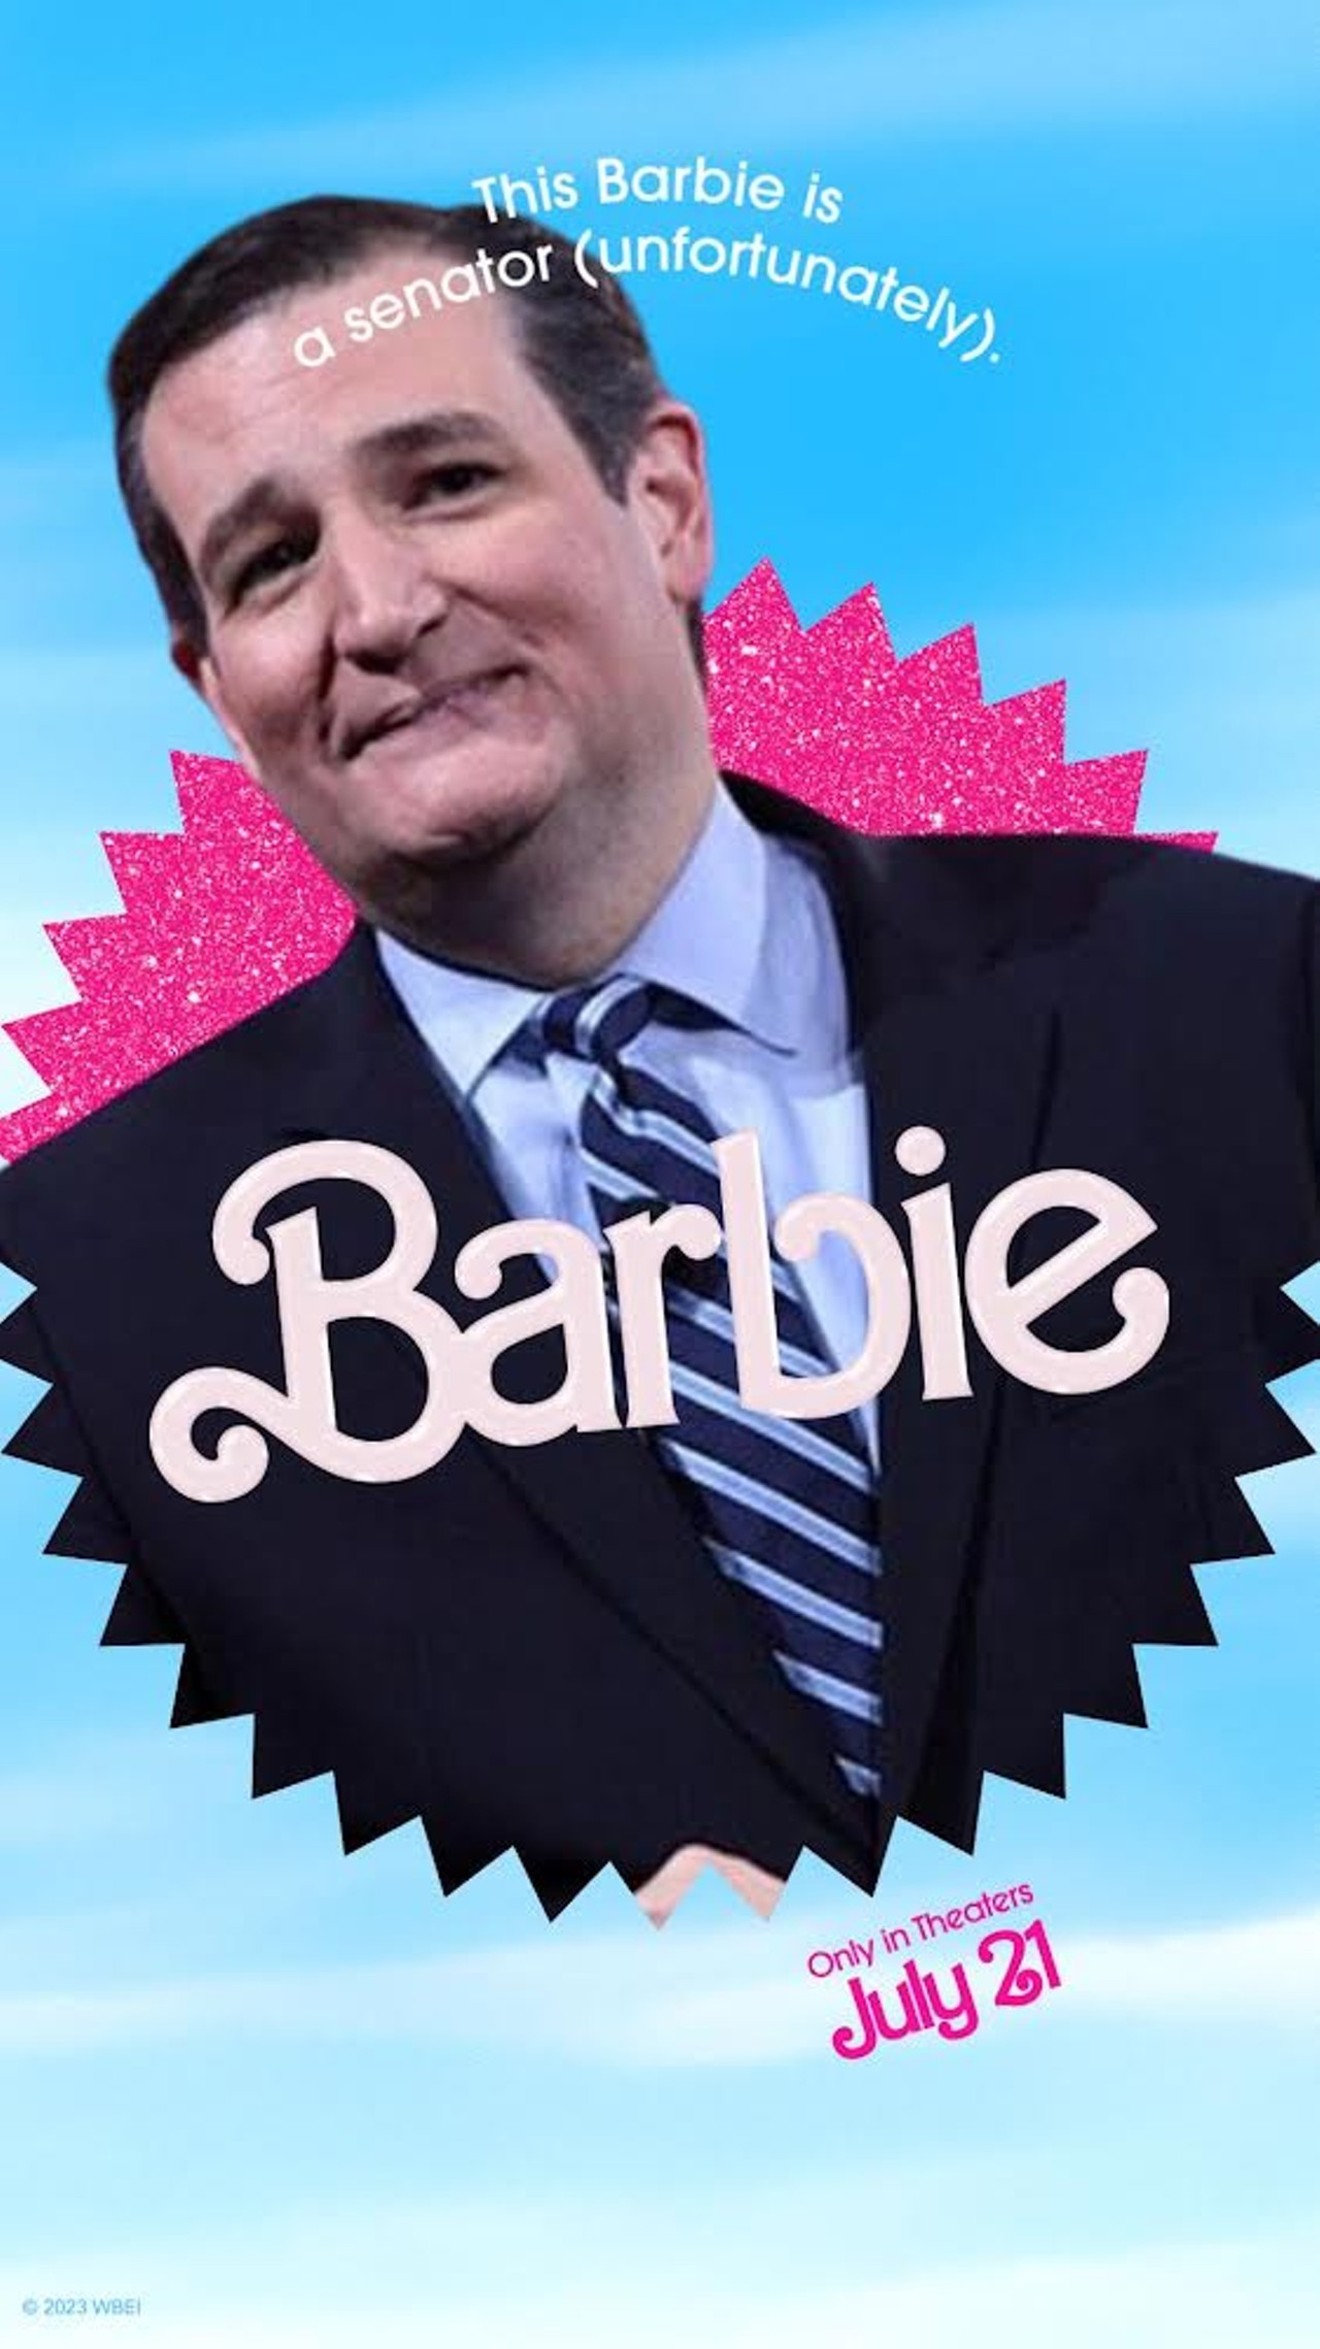 Sen. Ted Cruz doesn't like the Barbie movie. We are shocked.